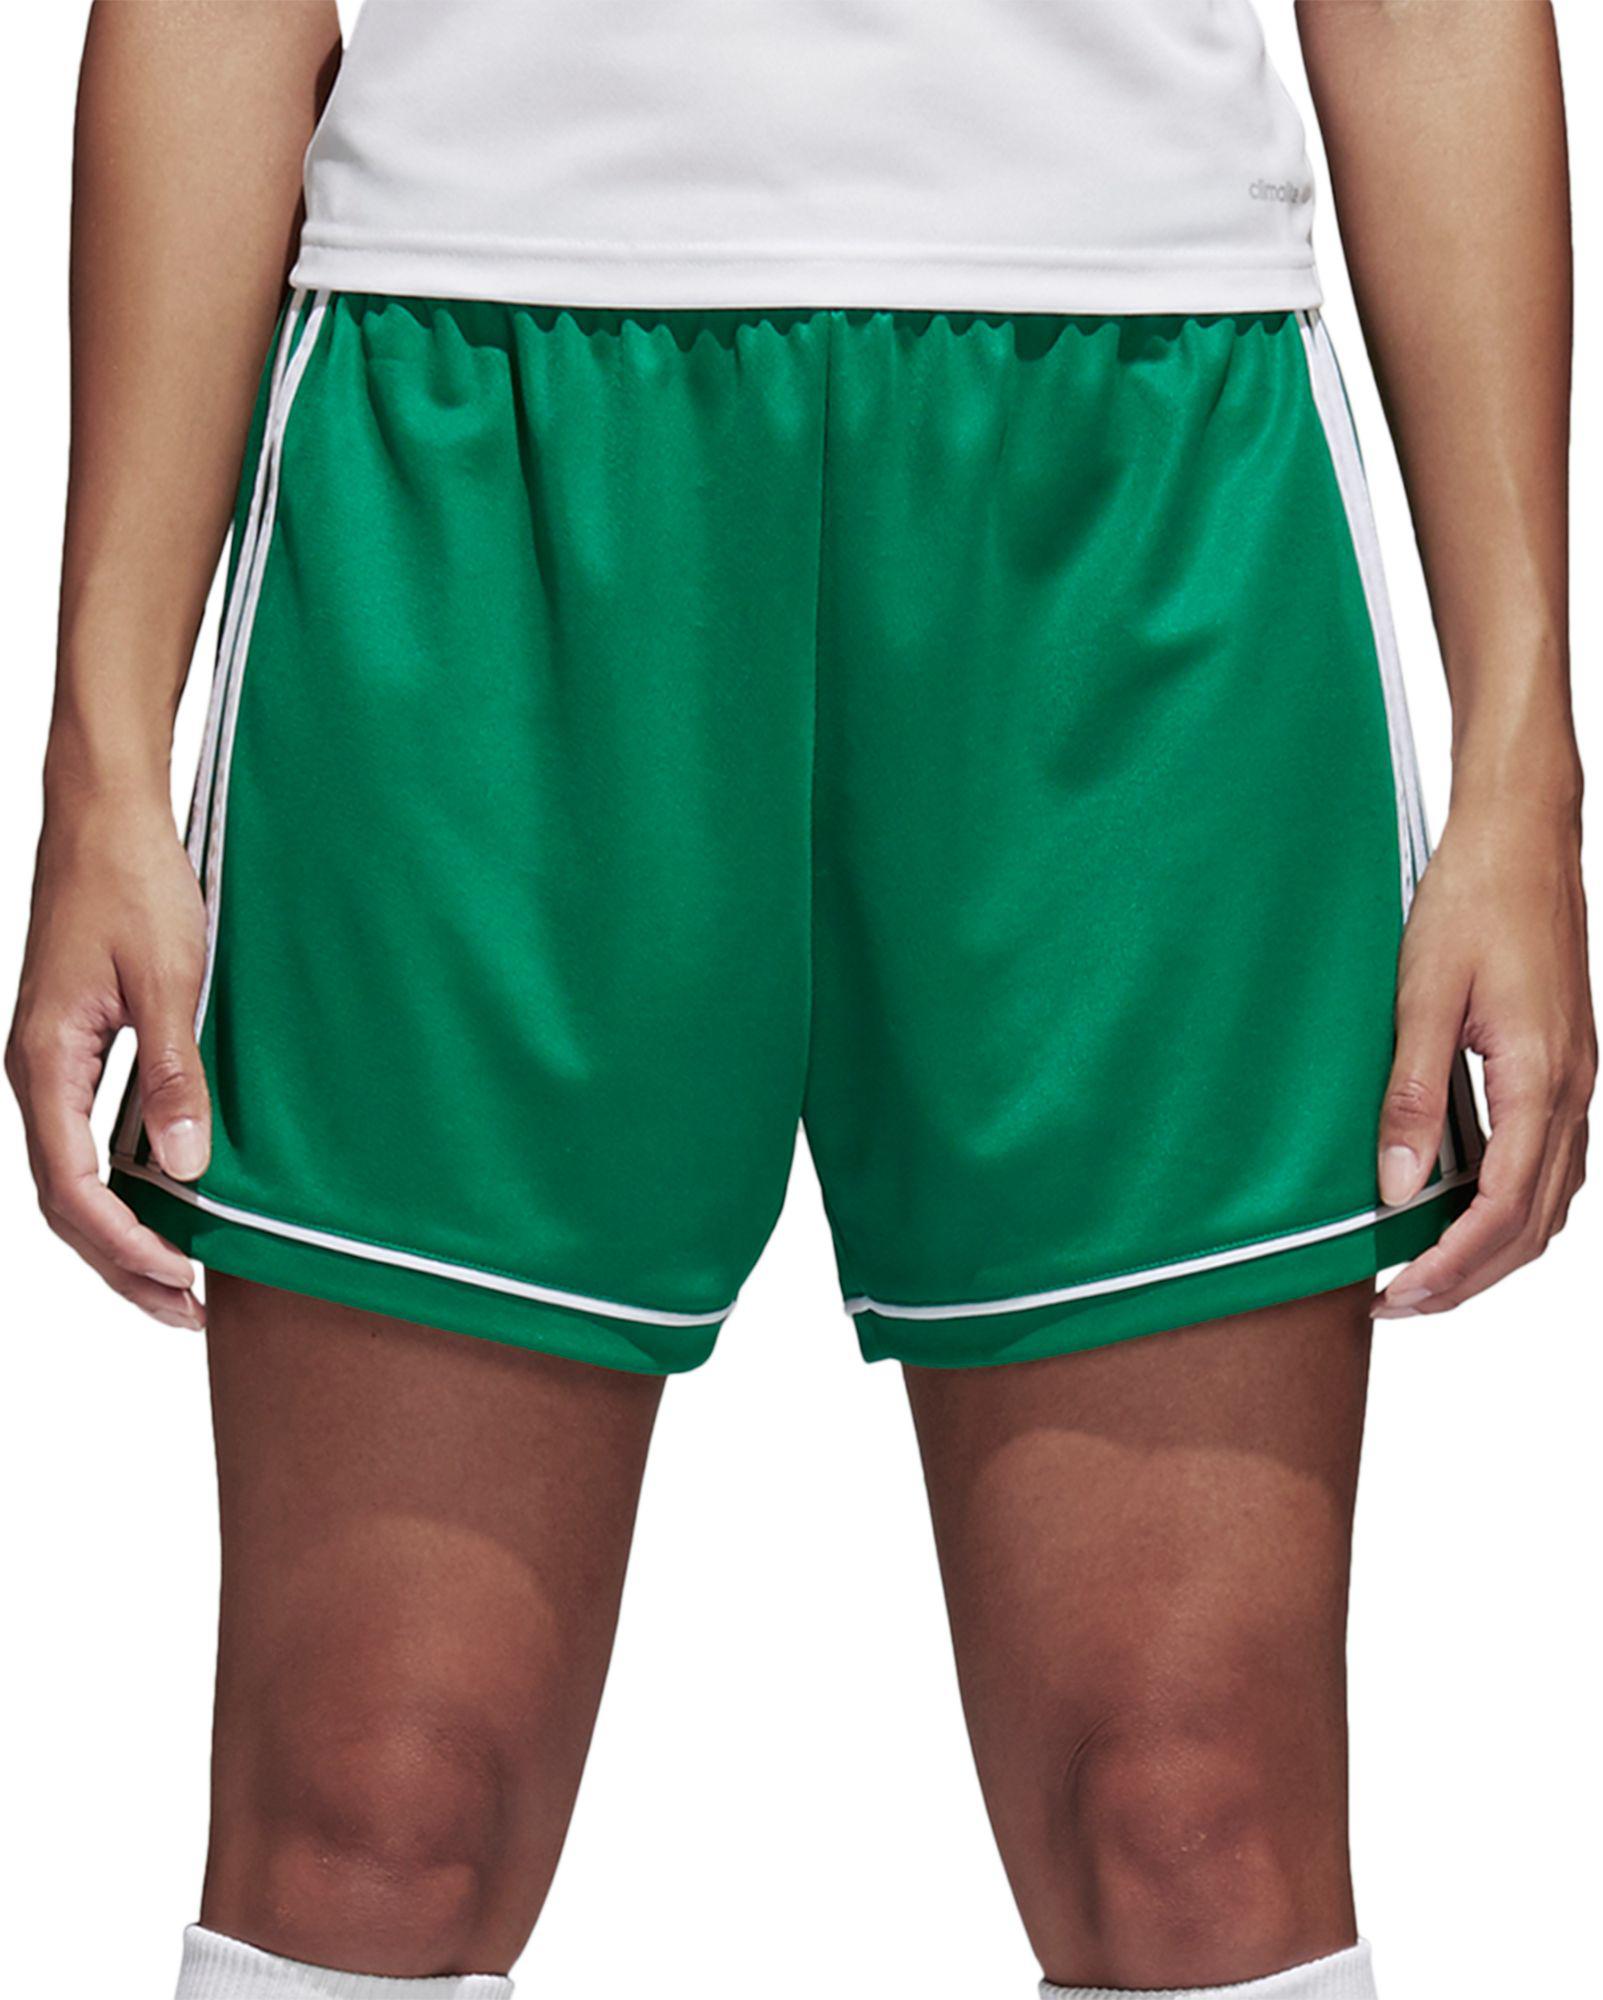 adidas Synthetic Squadra 17 Soccer Shorts in Bright Green (Green) - Lyst